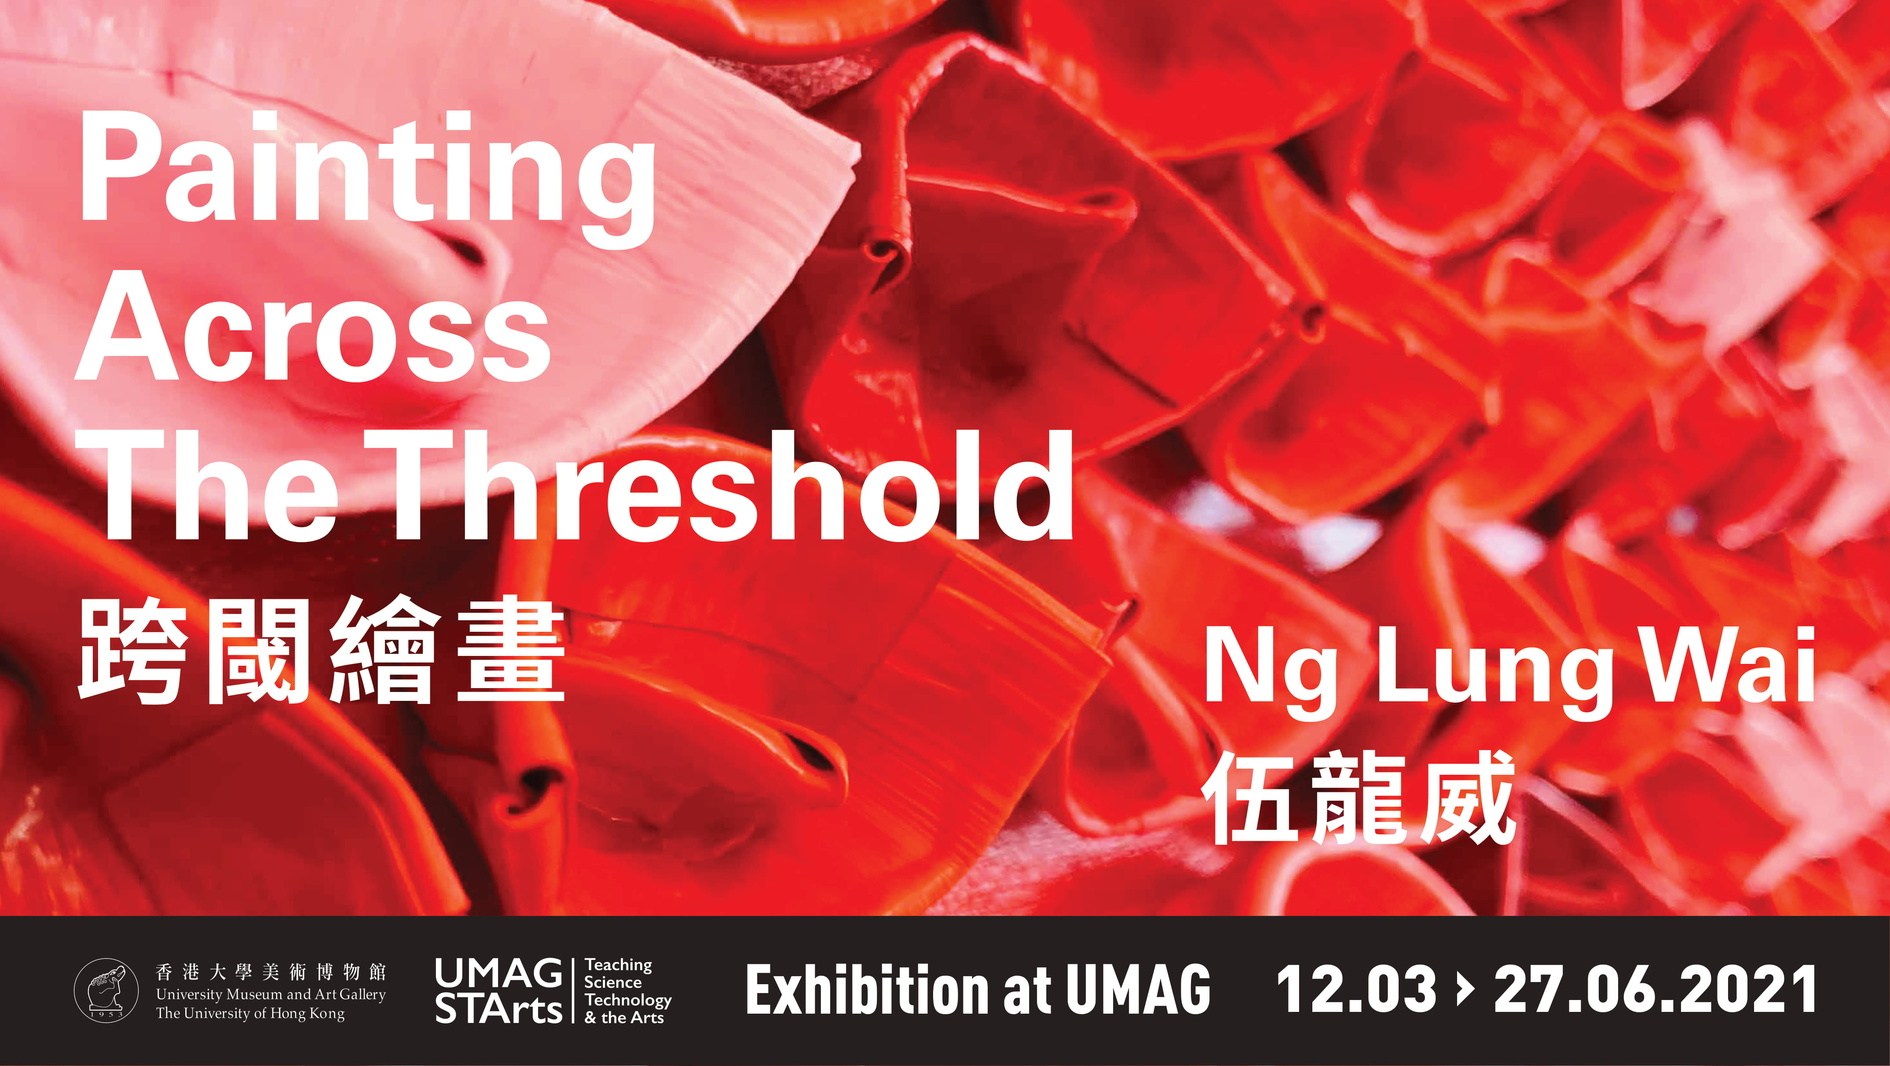 Painting Across The Threshold: Ng Lung Wai